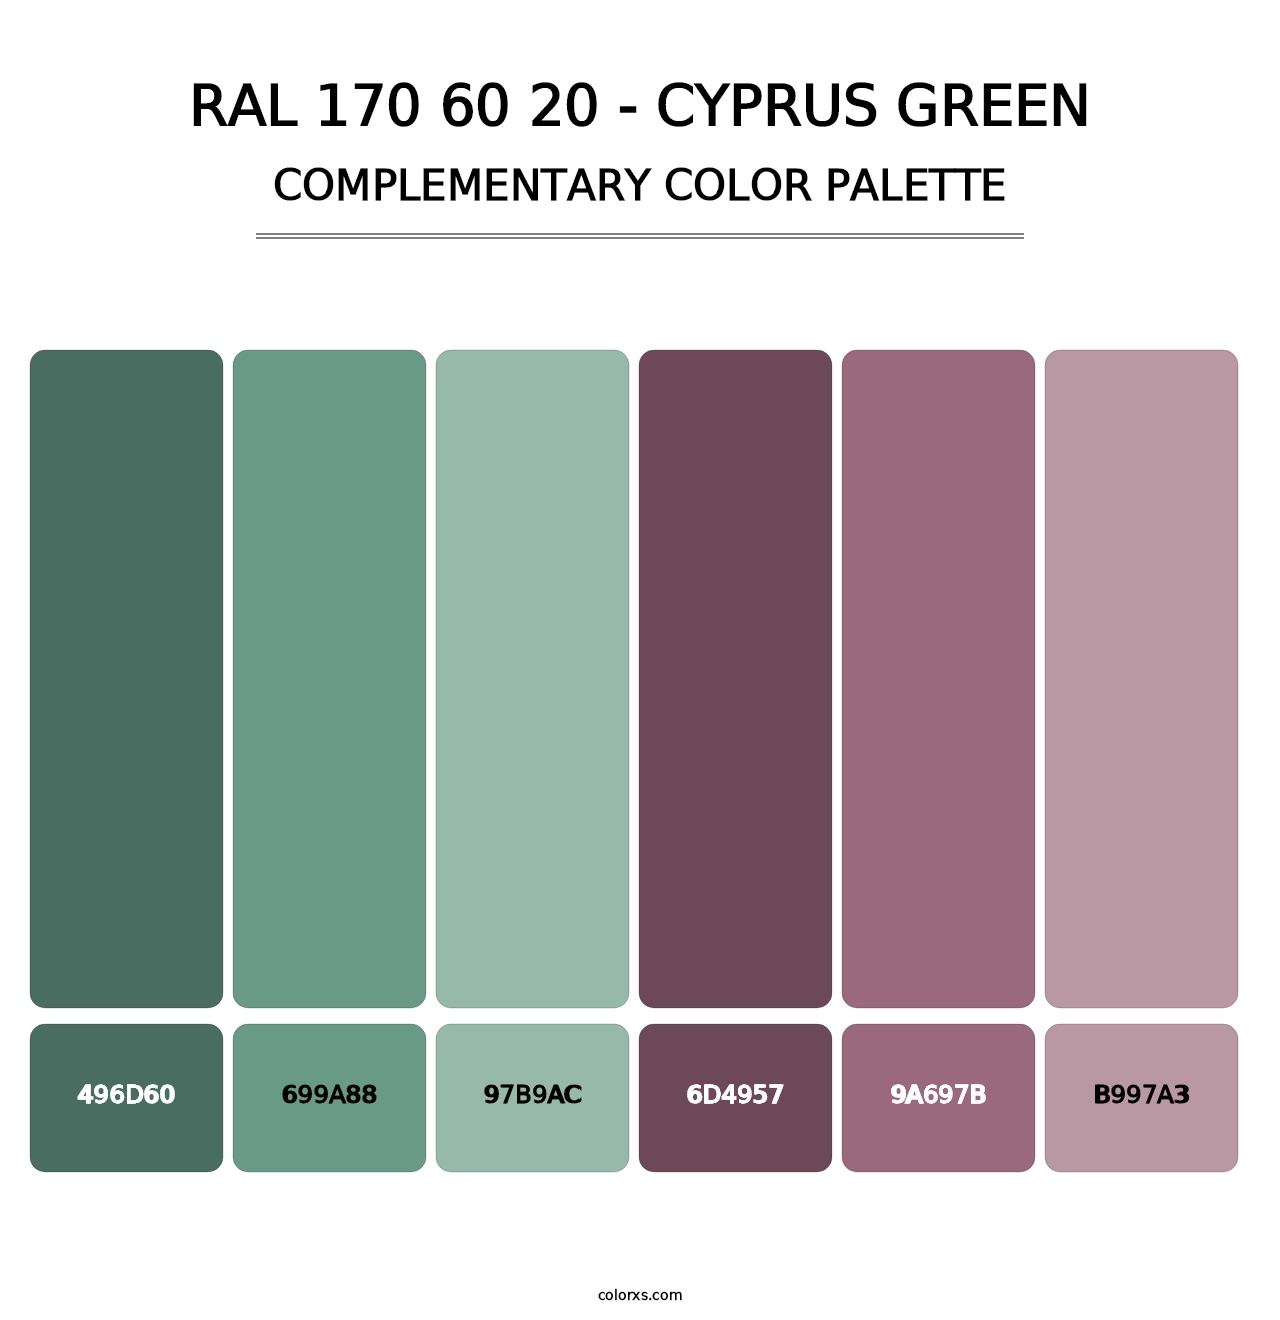 RAL 170 60 20 - Cyprus Green - Complementary Color Palette